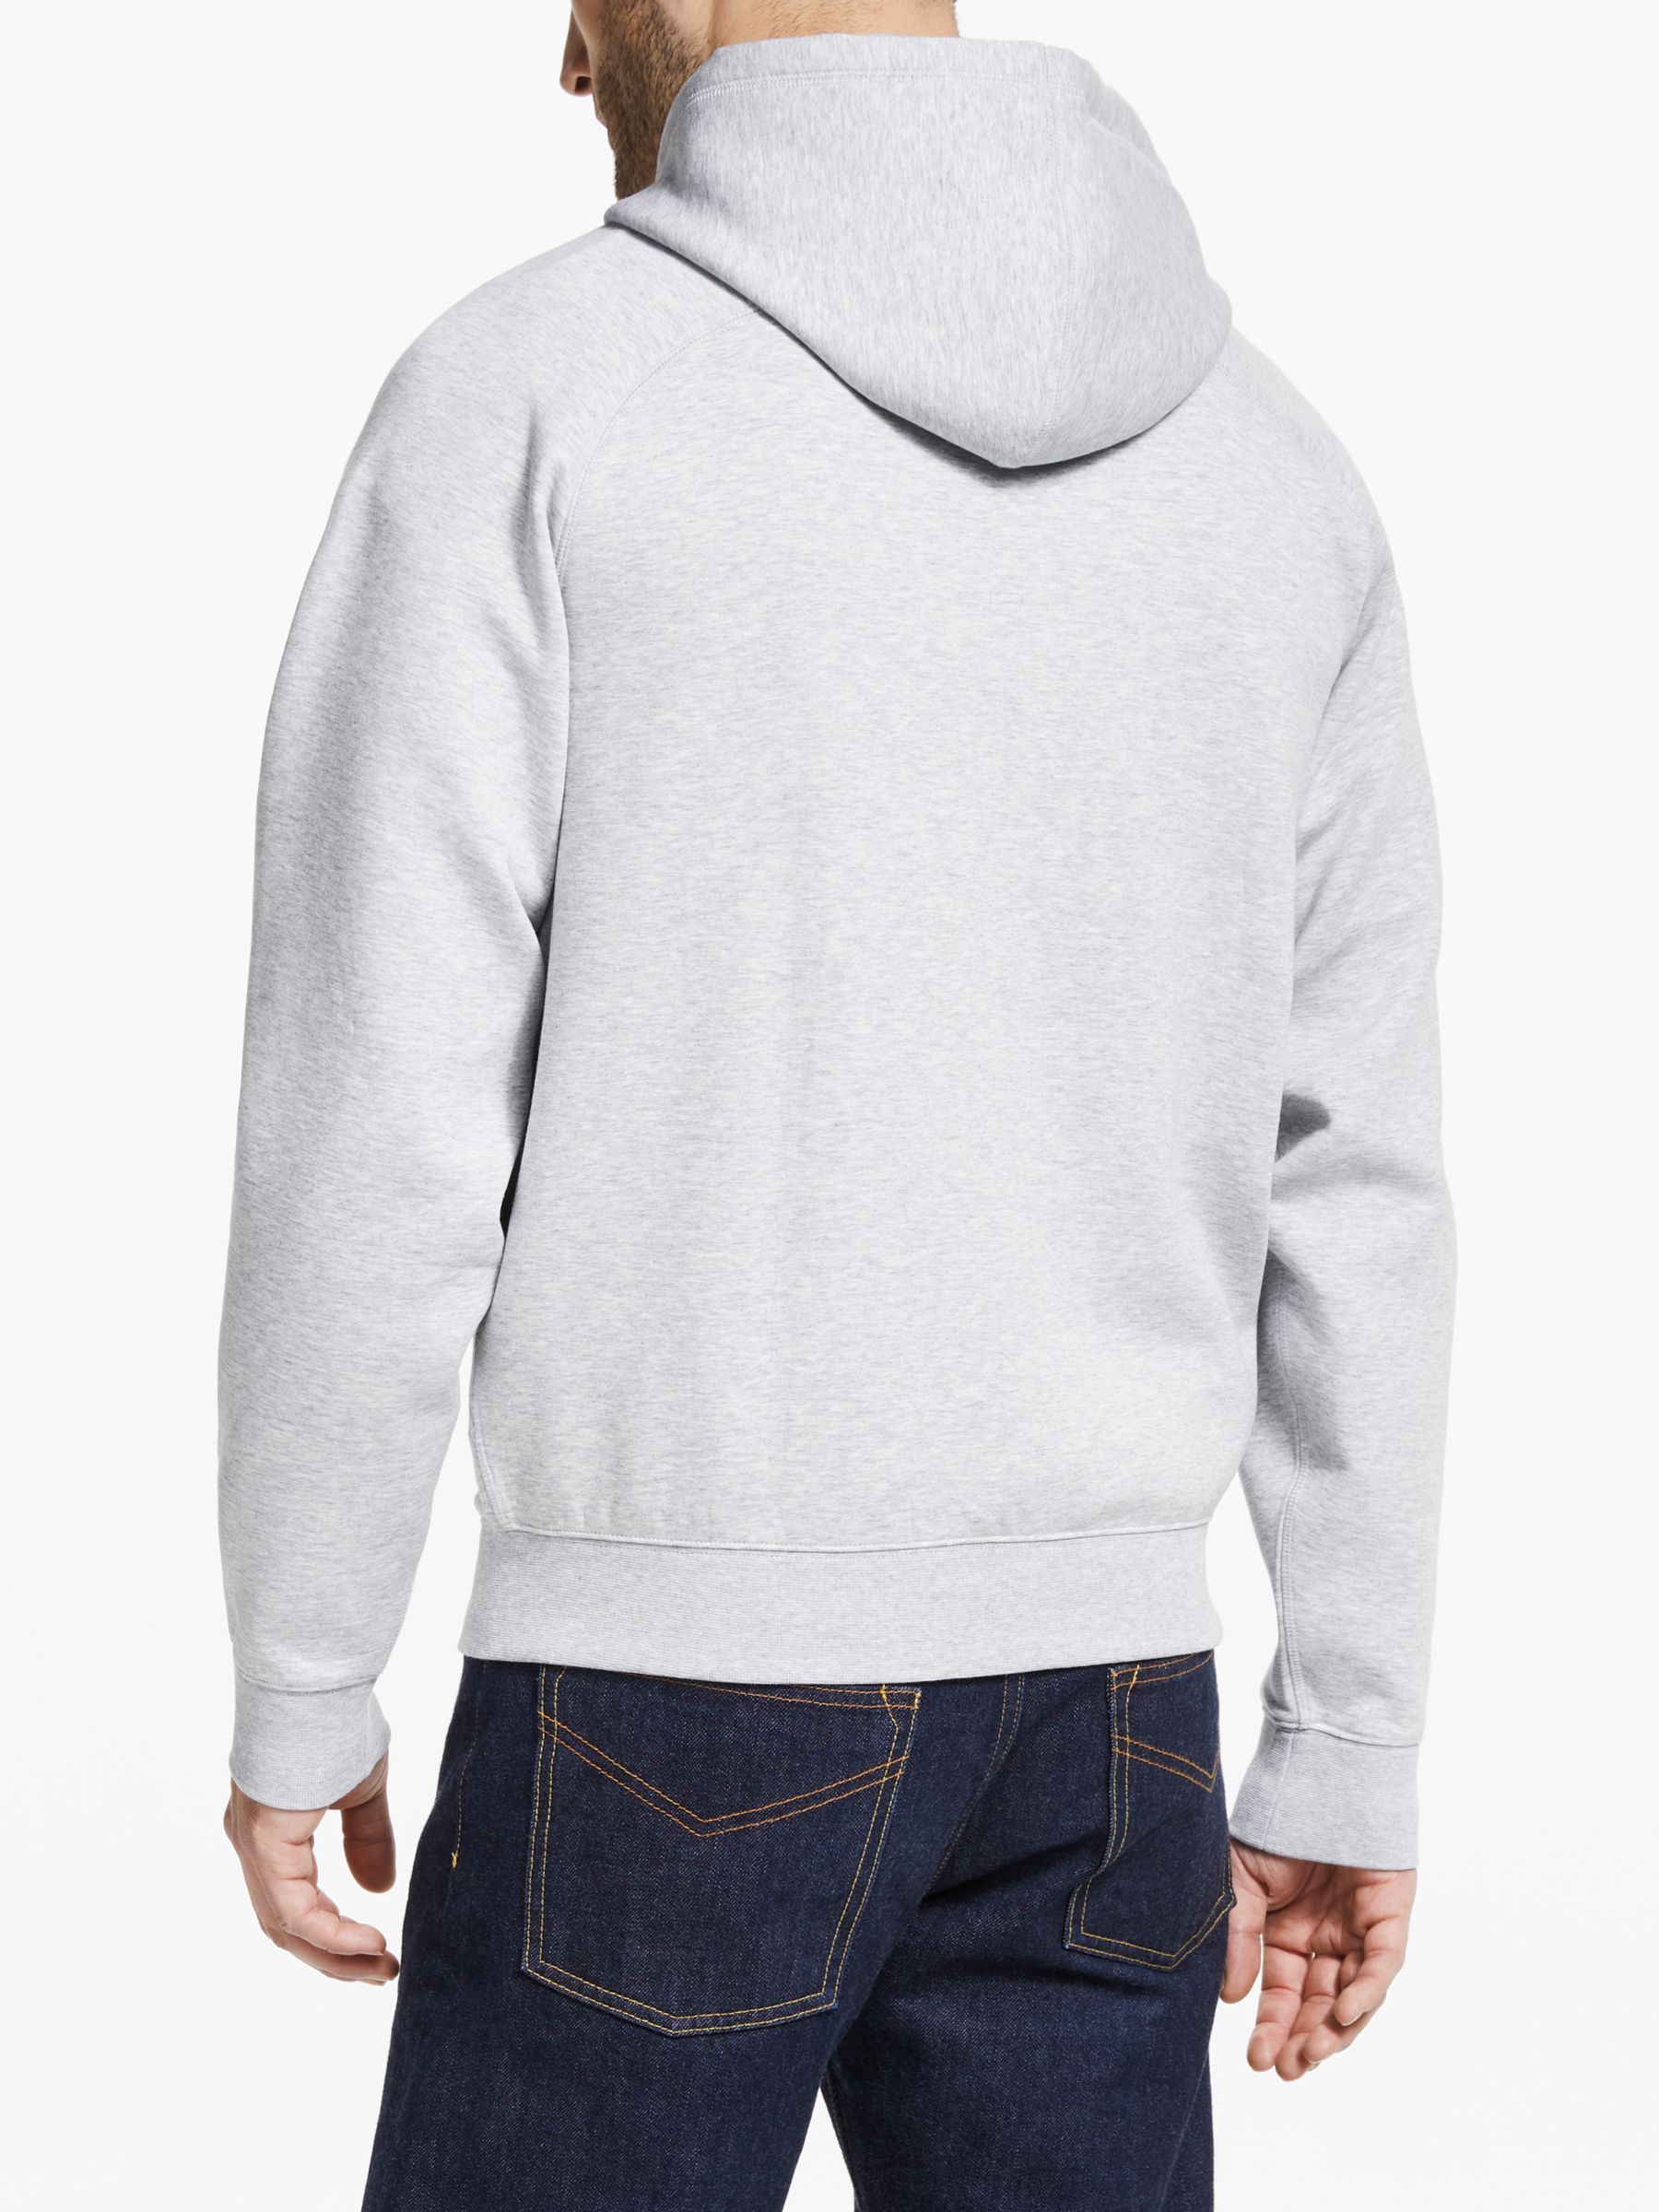 Lacoste in Motion Tracksuit Hoodie, Grey at John Lewis & Partners